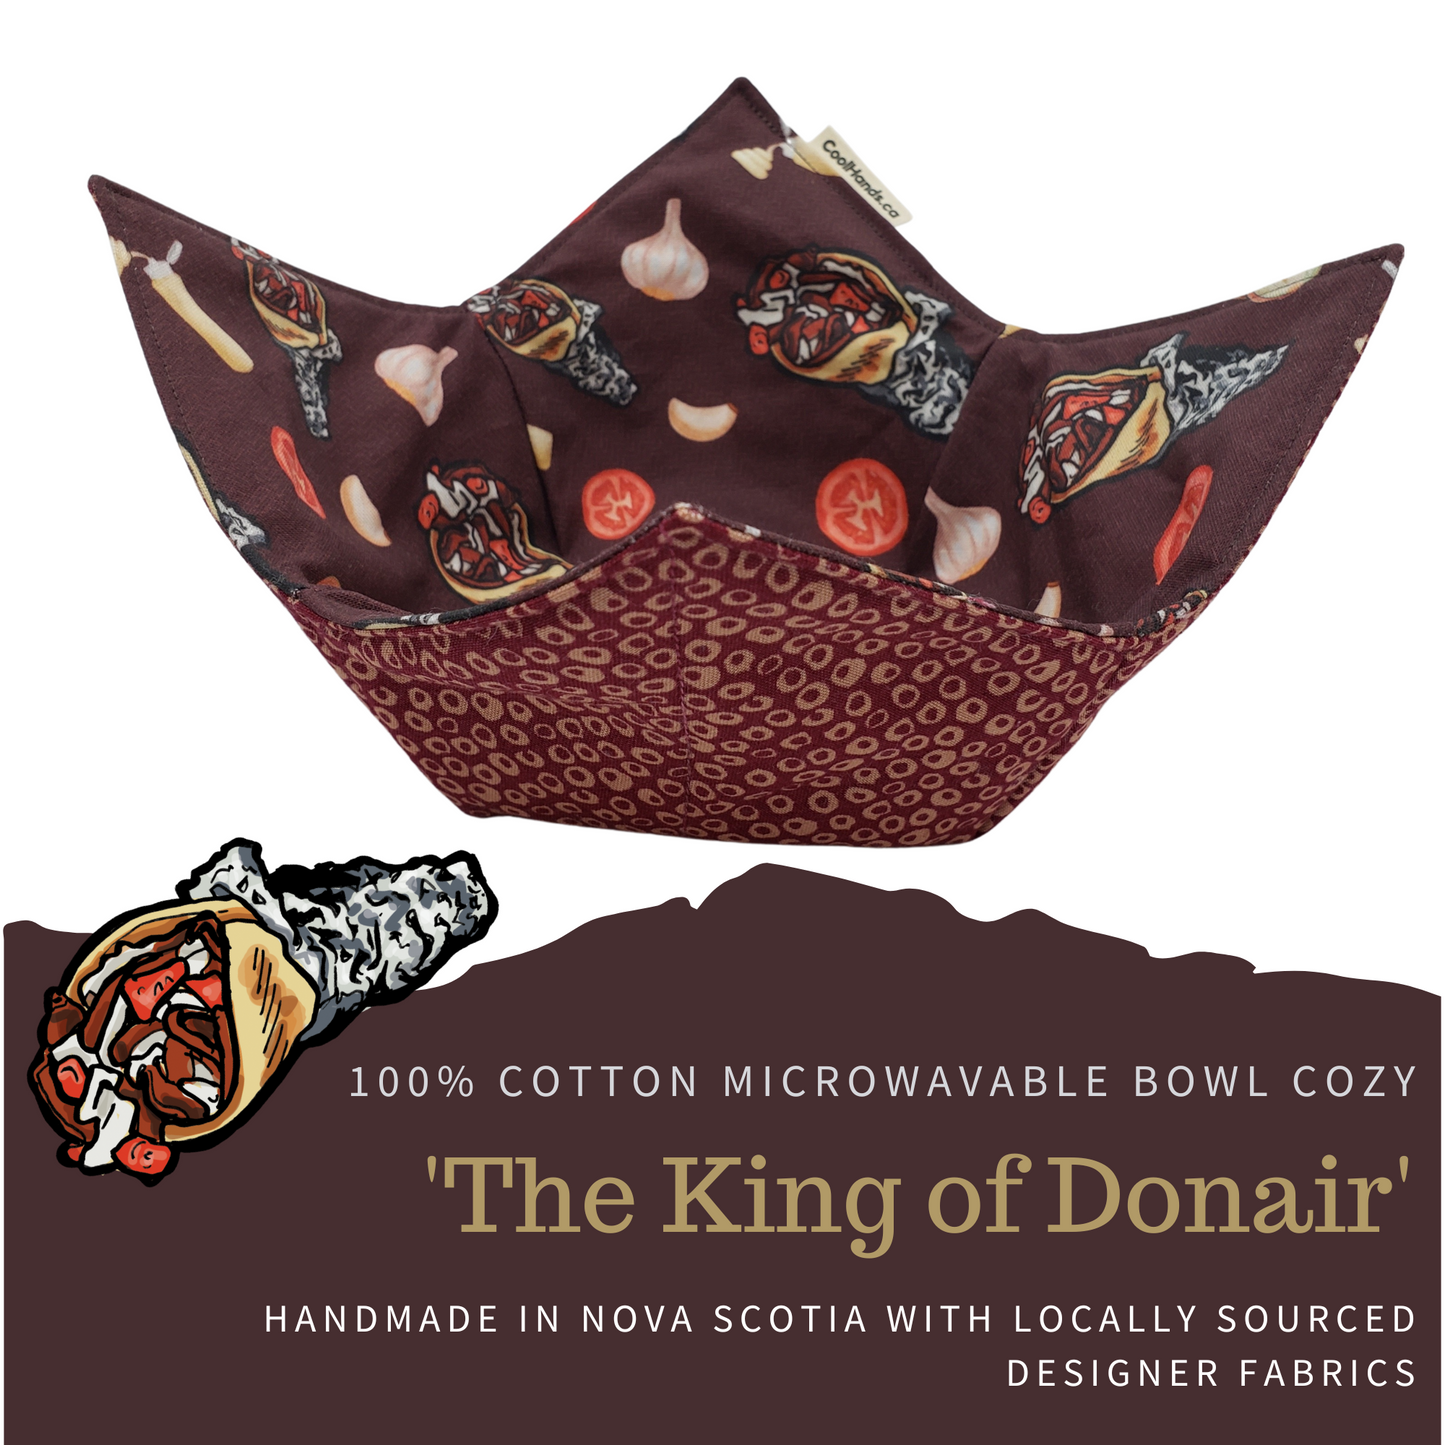 100% Cotton Microwavable Bowl Cozy - A Tribute to the King of Donair